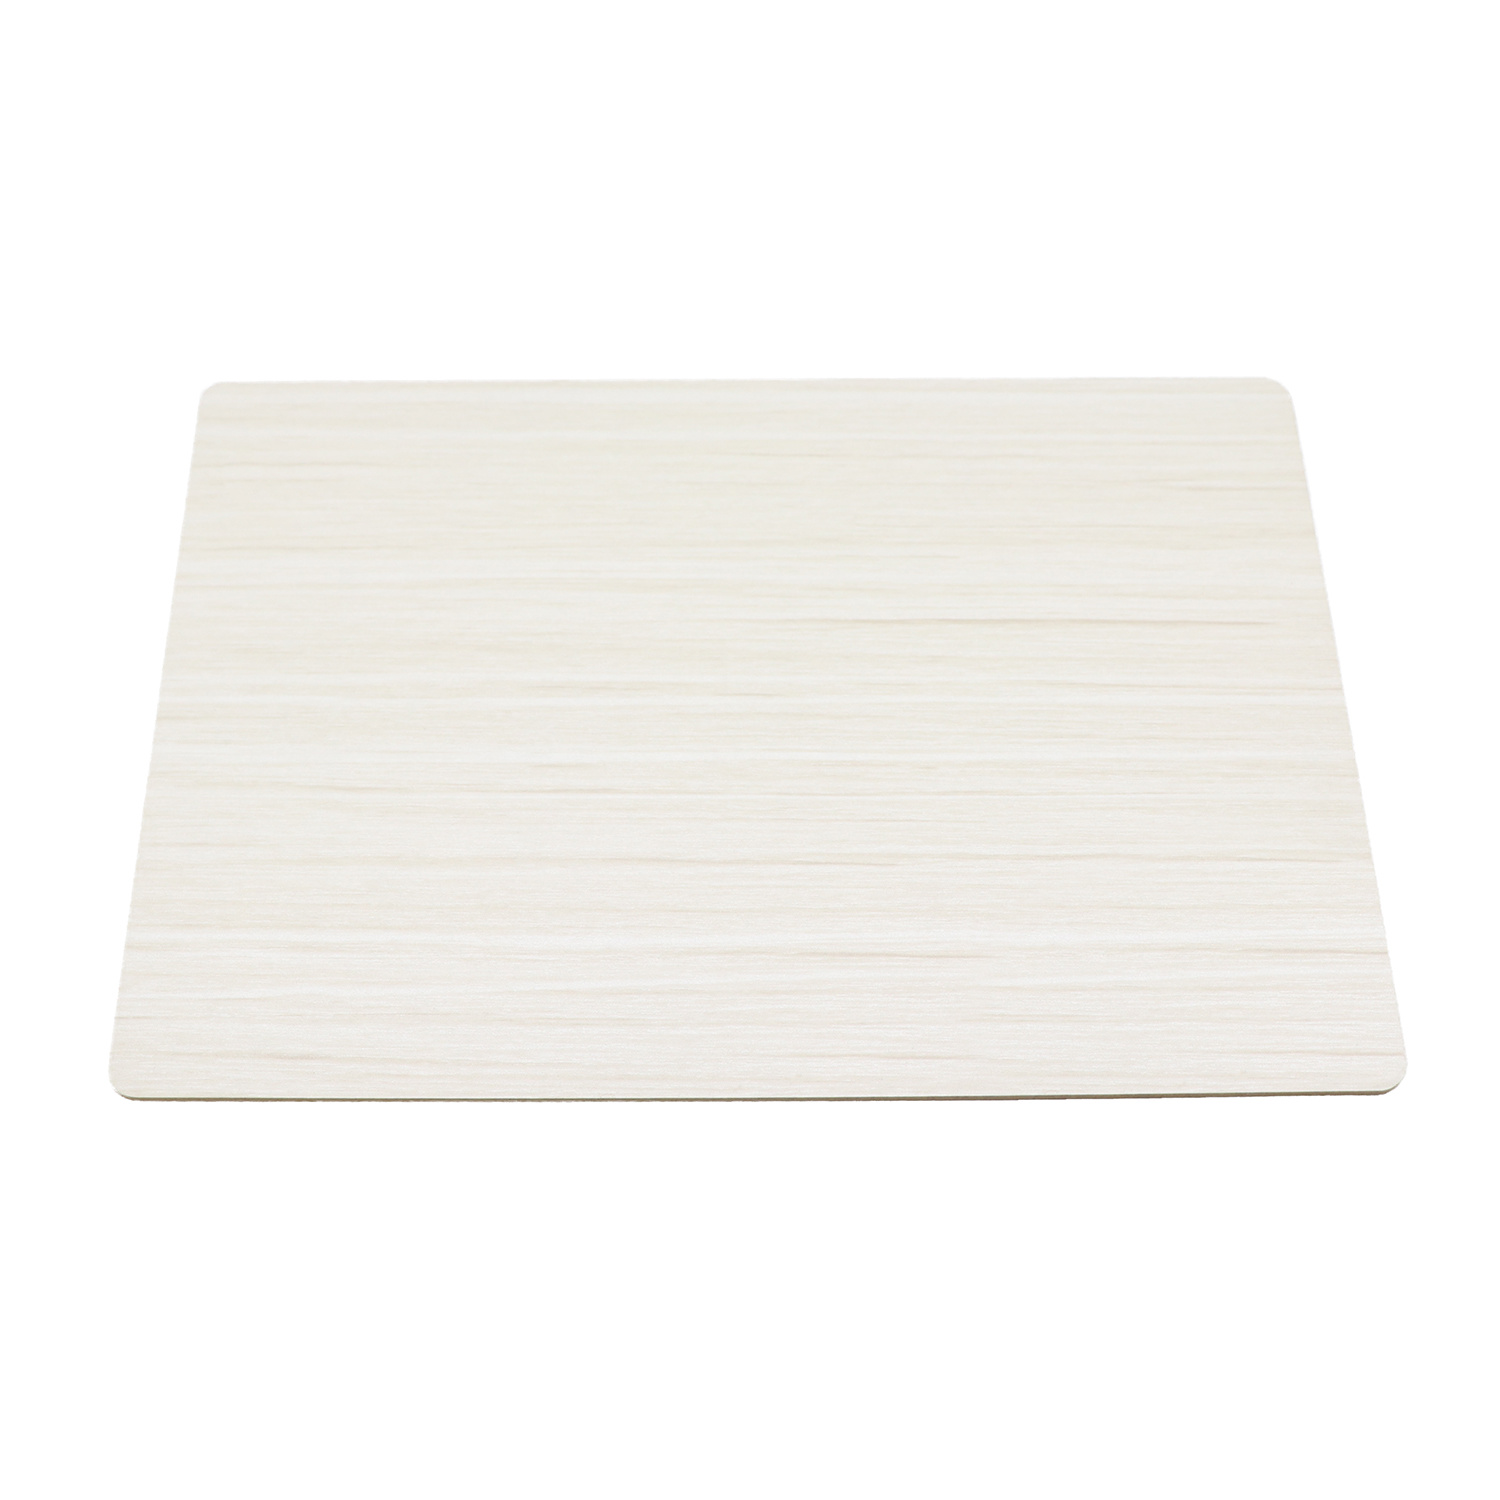 Top Grade Wood Grain Faced Plywood Kinds of Grain Melamine Coated Ply Wood for Decoration